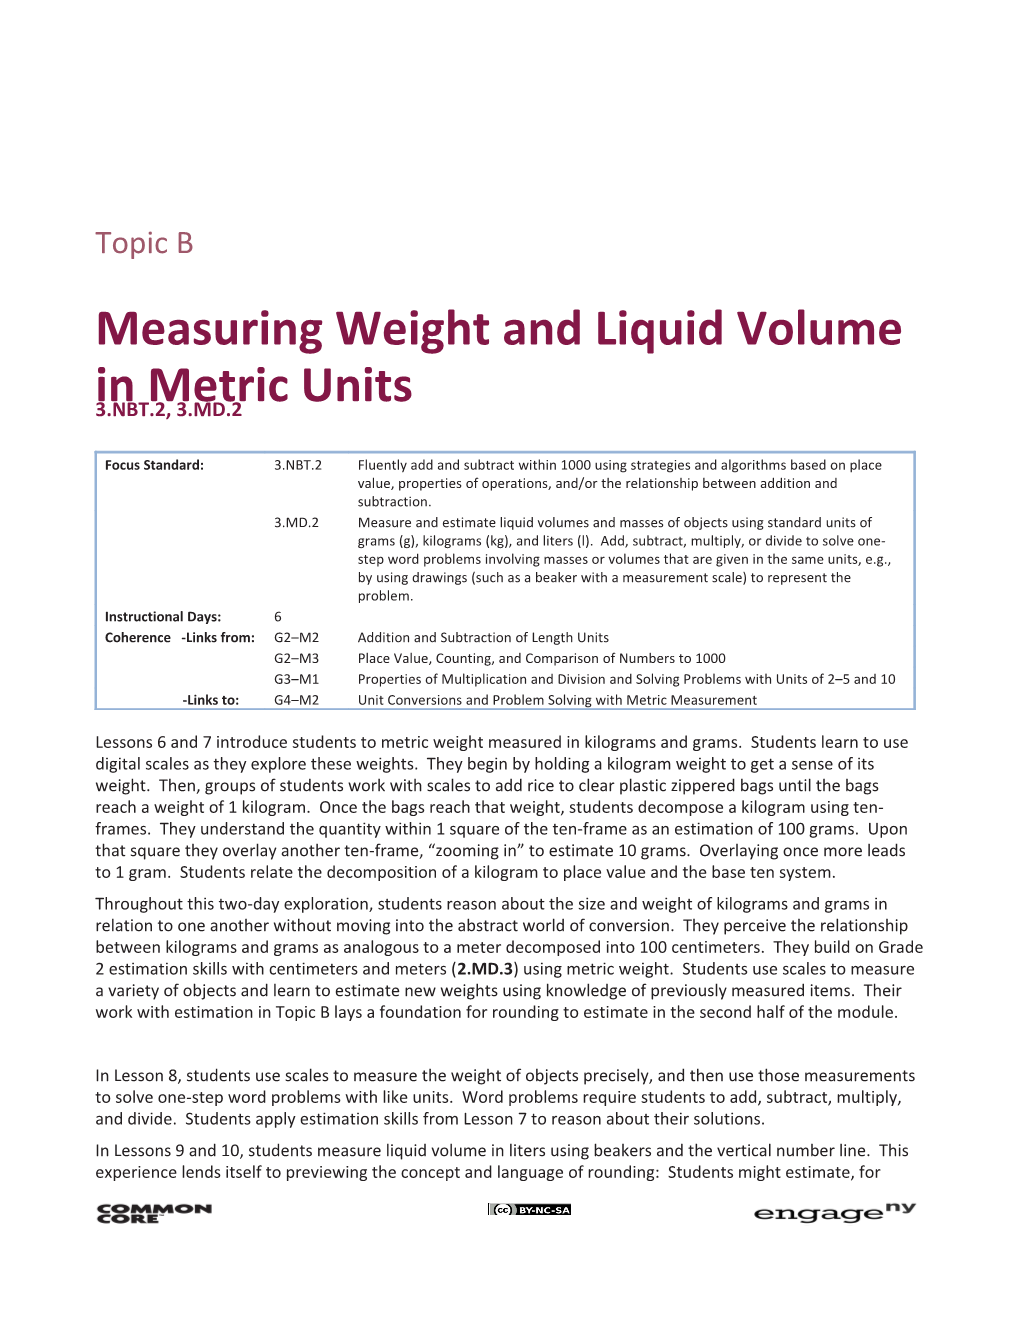 Measuring Weight and Liquid Volume in Metric Units